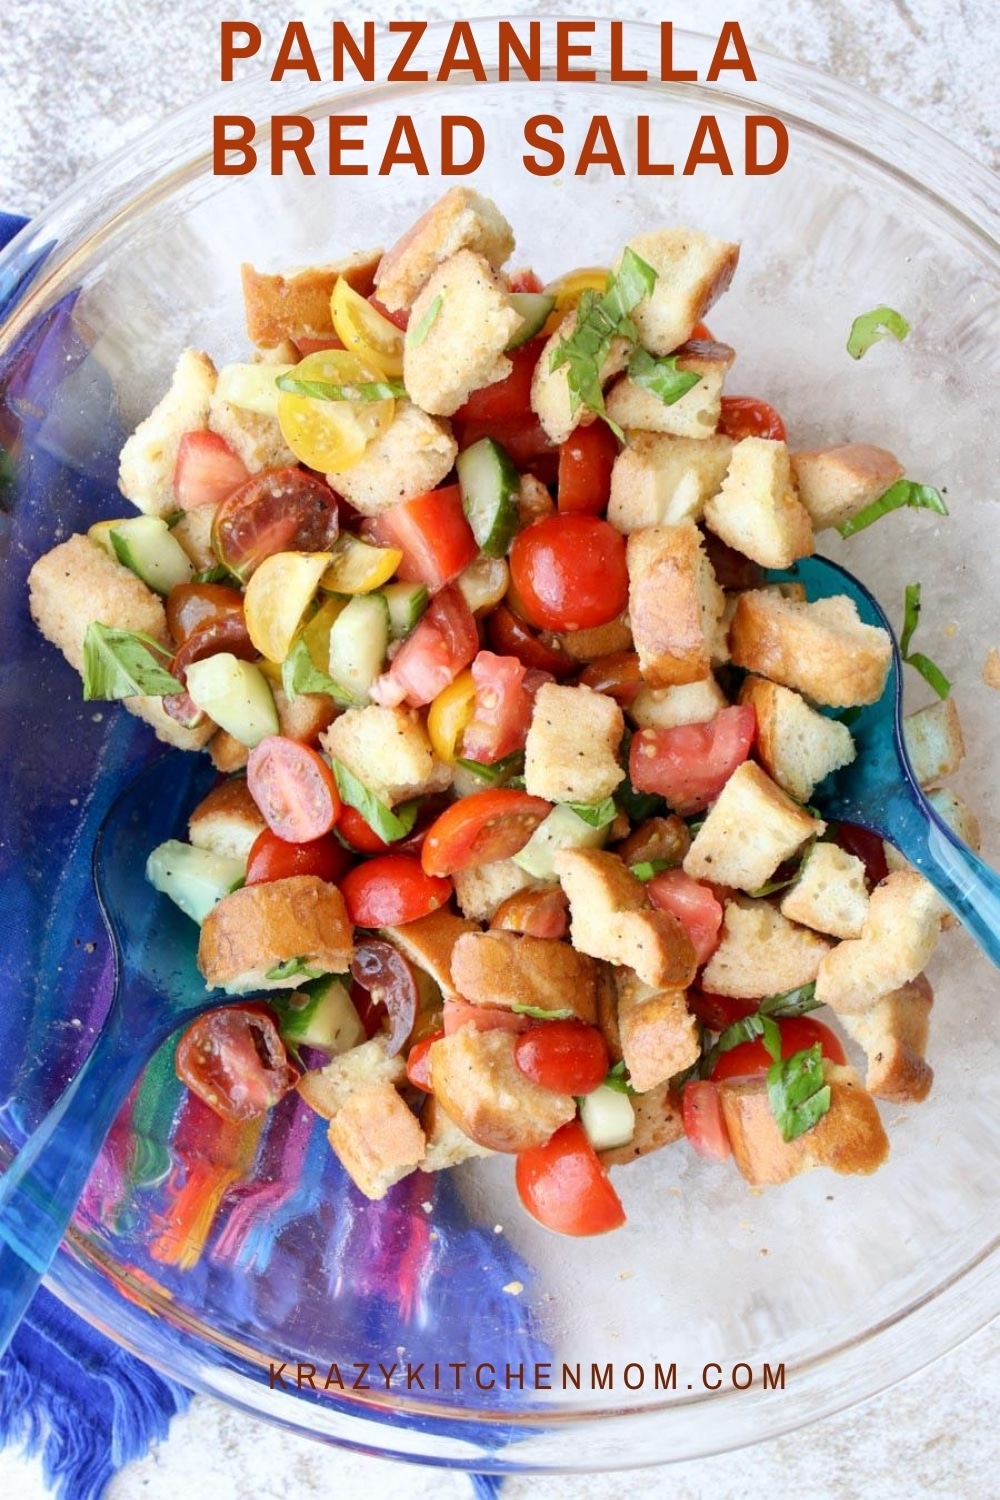 This is my summertime version of the classic Italian Panzanella Salad. I've added fresh slices of juicy peaches that add another layer of freshness and sweetness. Once you try it, I promise it will become your "go-to summer salad" too! via @krazykitchenmom